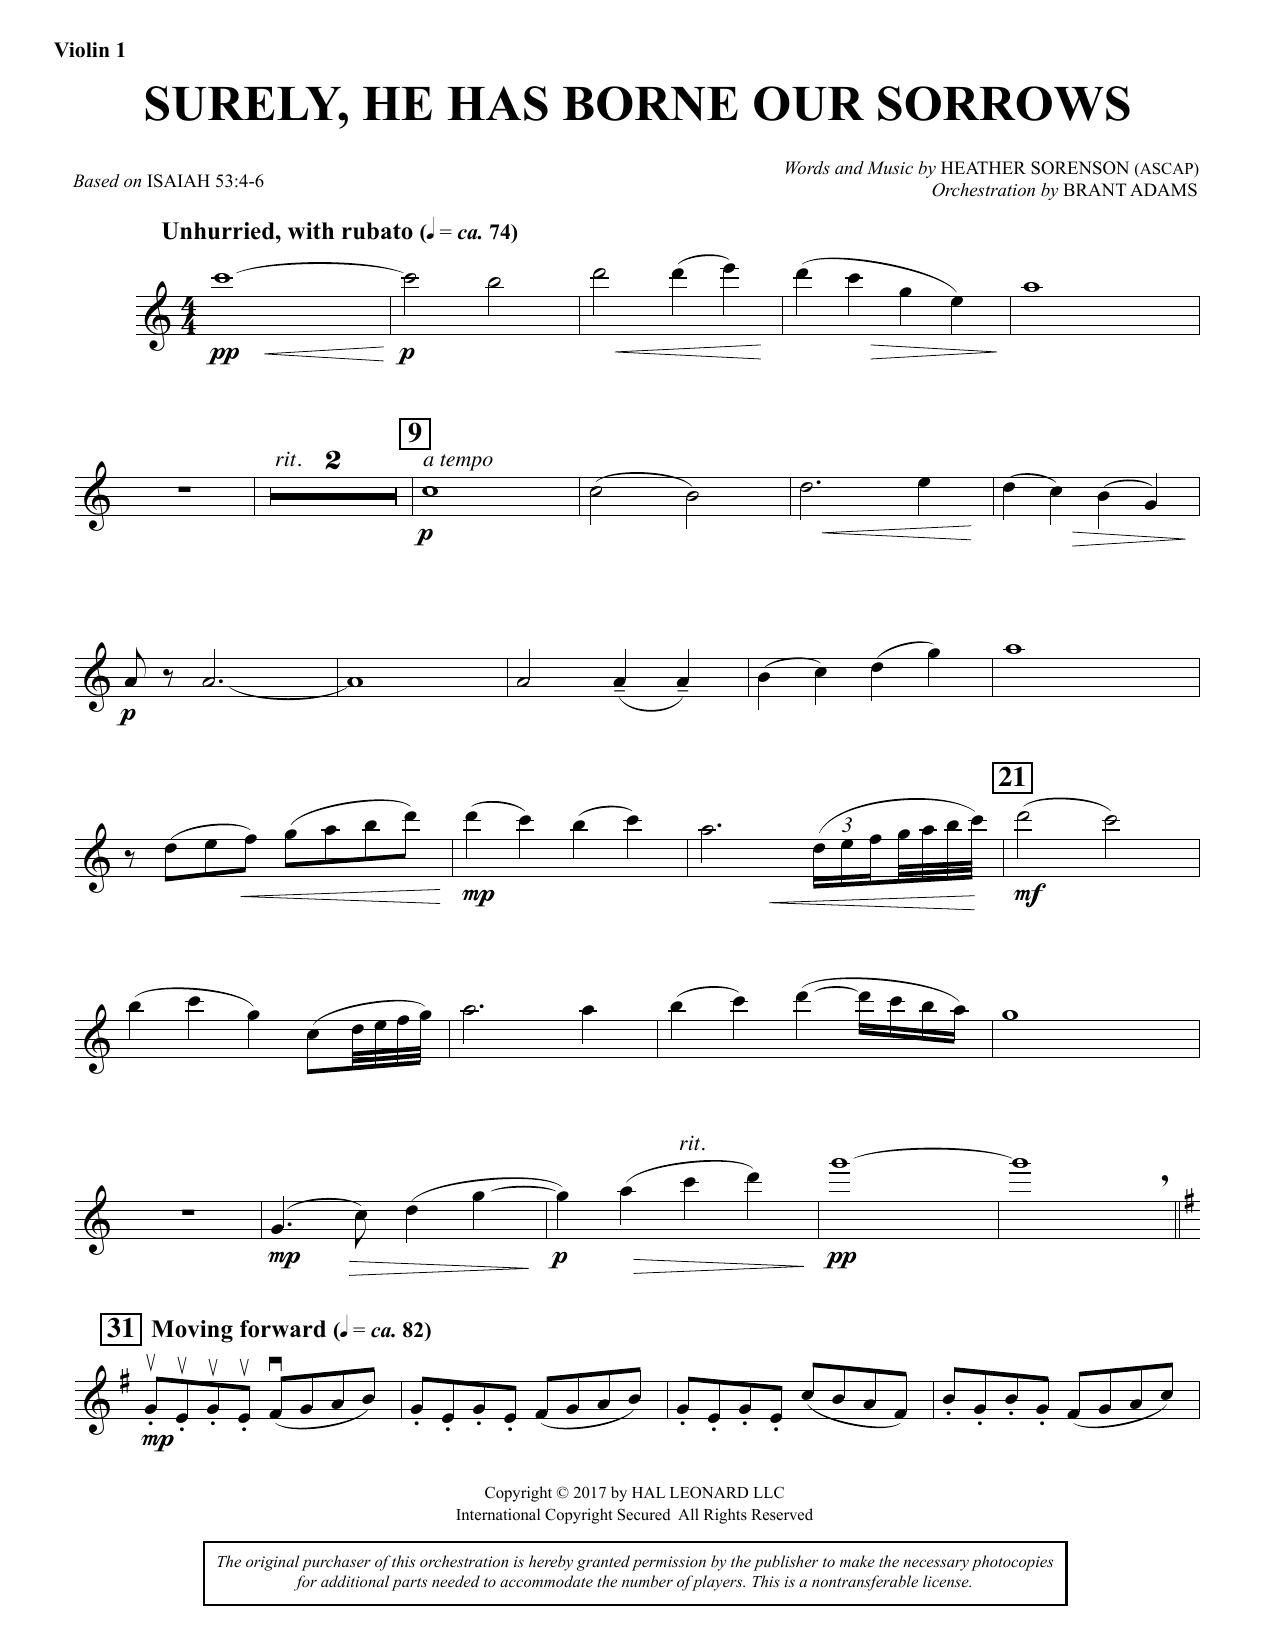 Download Heather Sorenson Surely, He Has Borne Our Sorrows - Viol Sheet Music